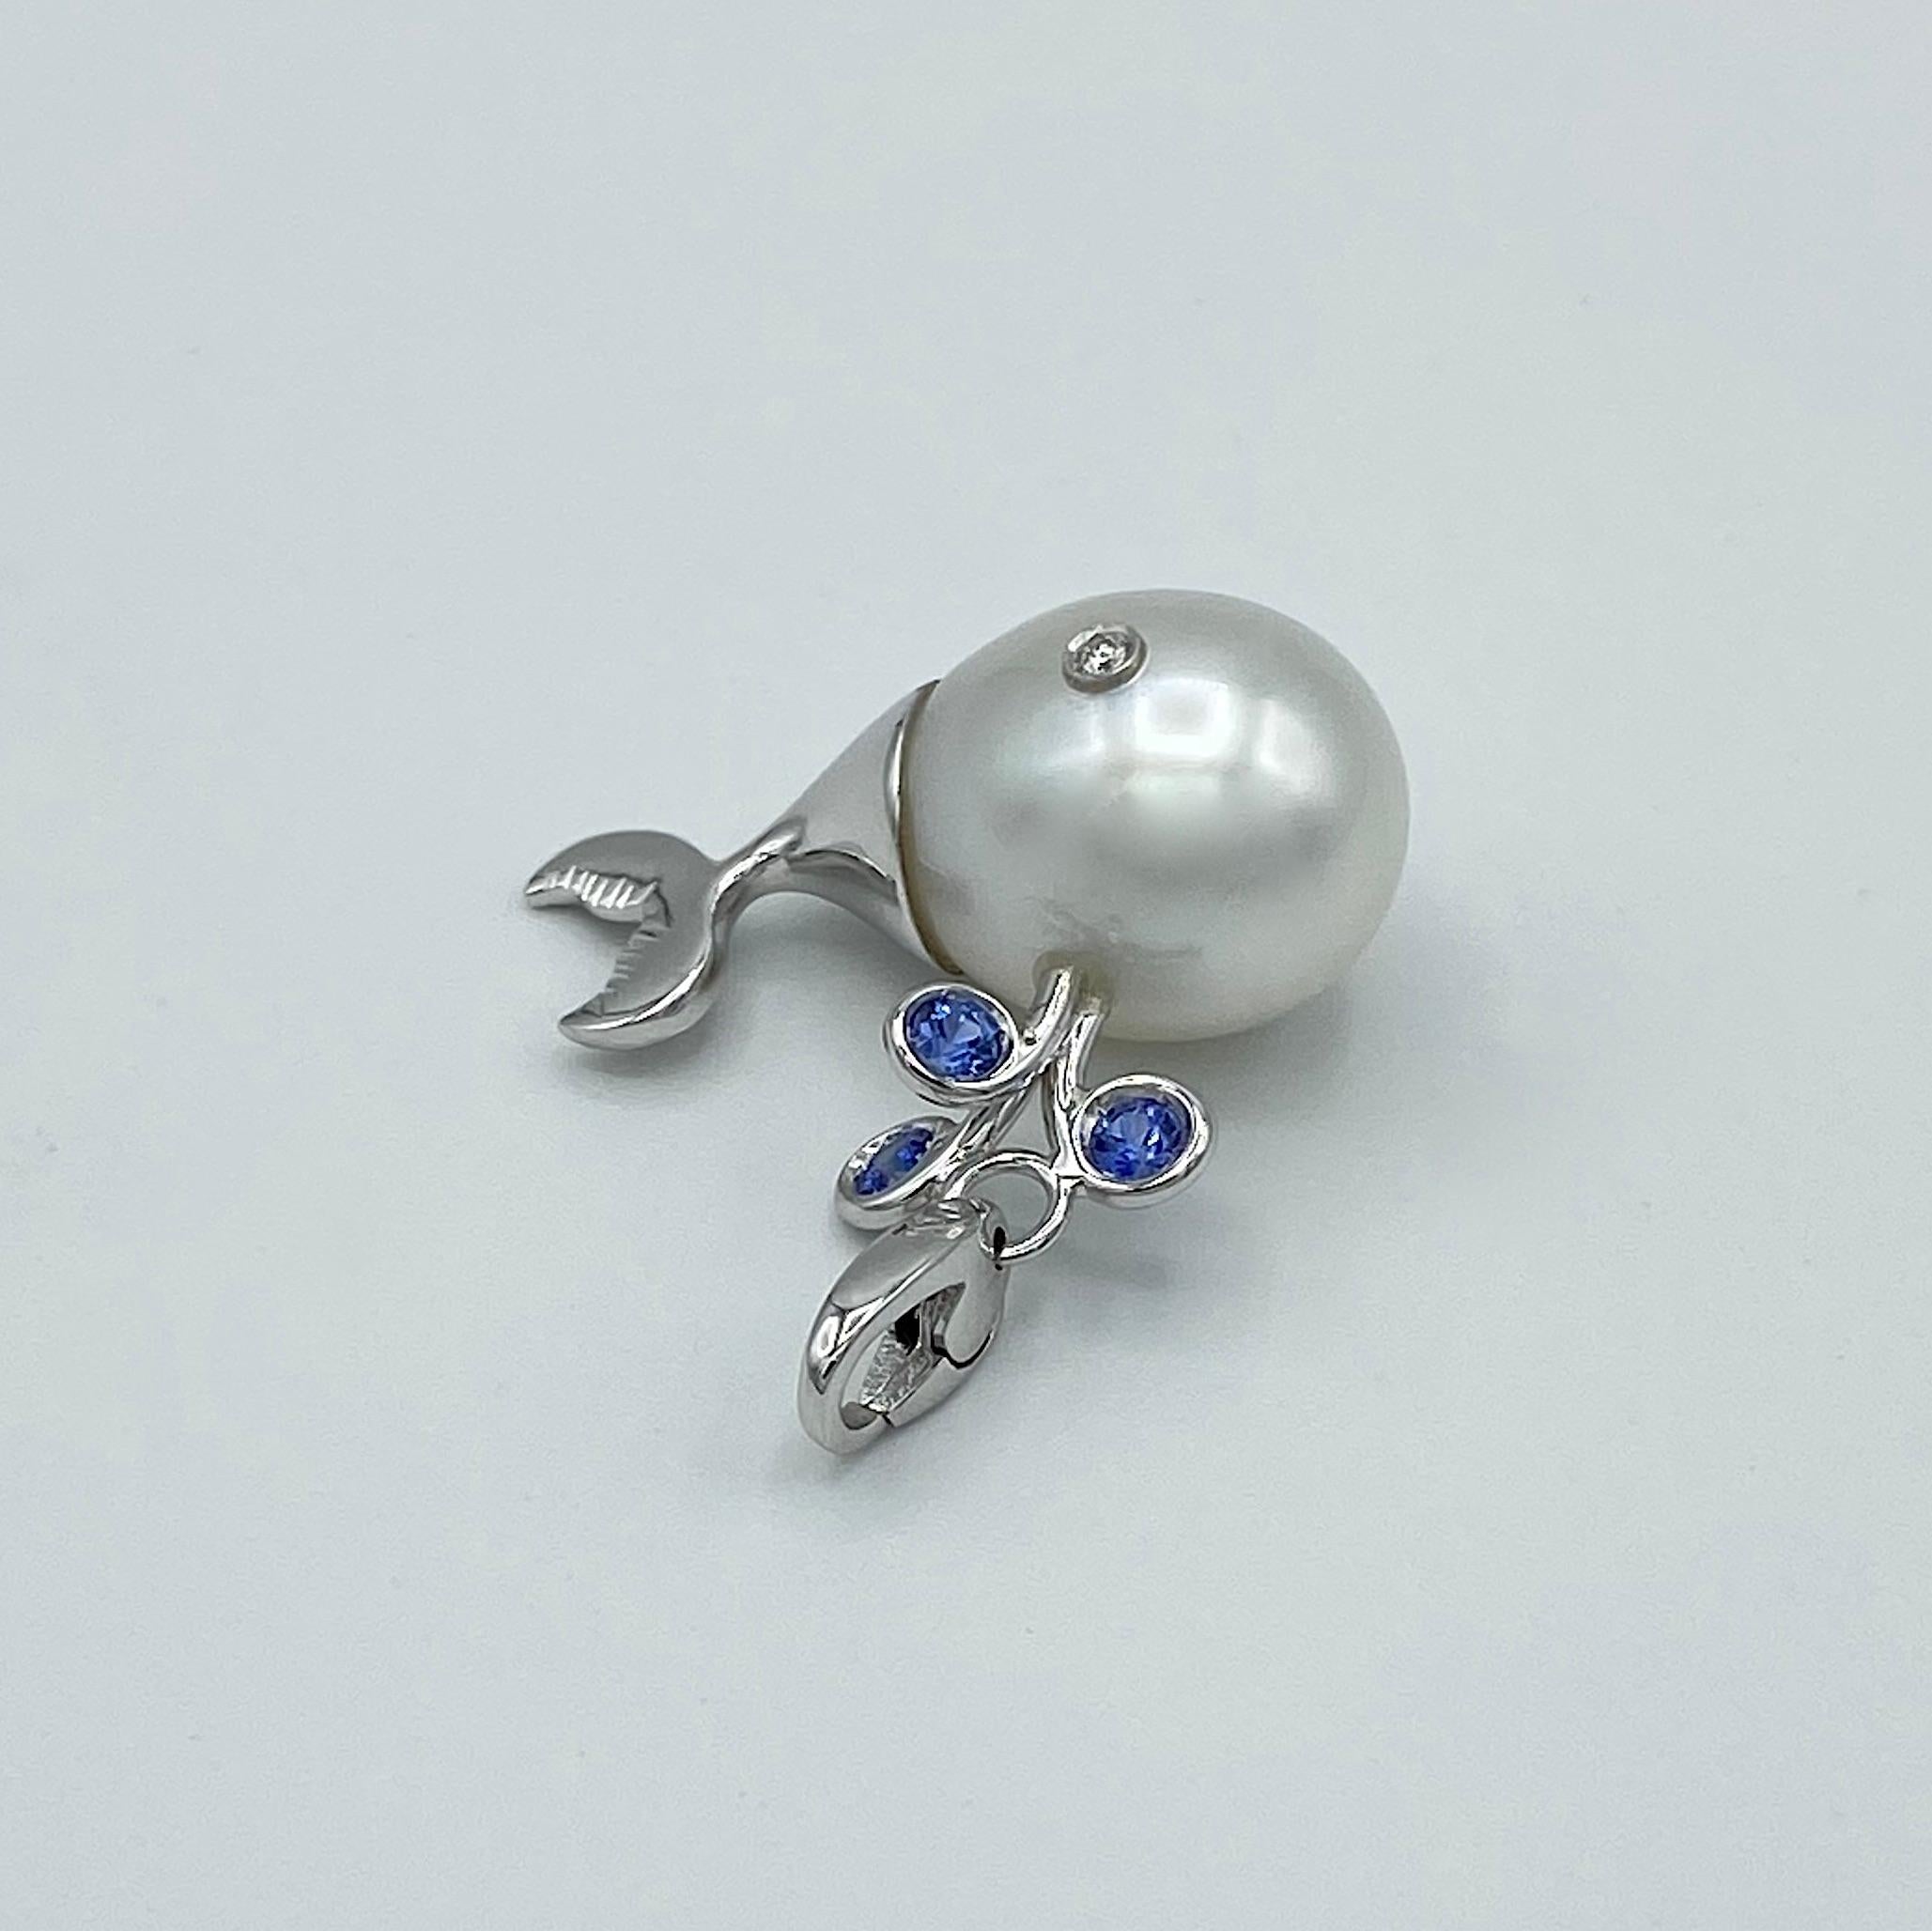 Round Cut White Diamond Blue Sapphire Pearl 18 Karat Gold Whale Pendant/Necklace and Charm